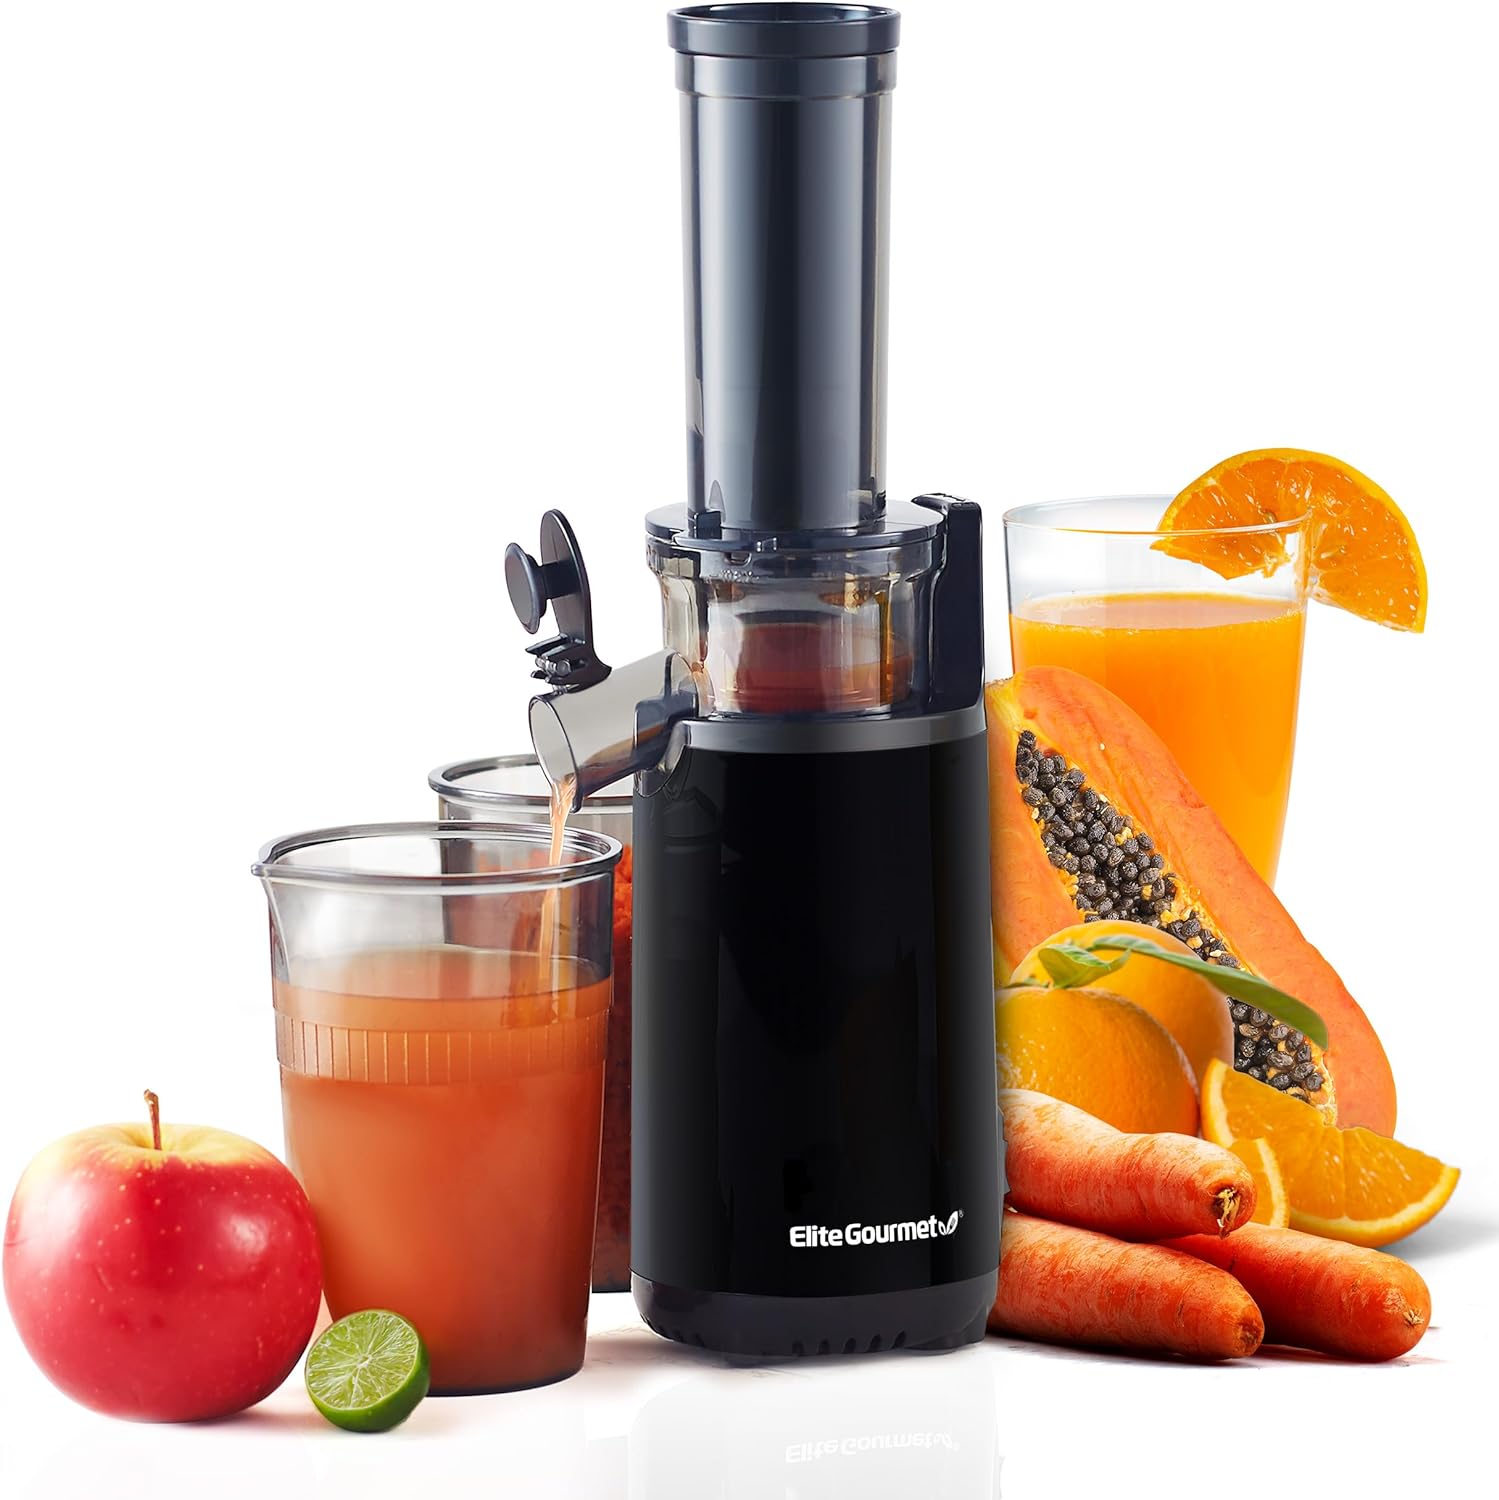 Elite Gourmet EJX600 Compact Juicer Review